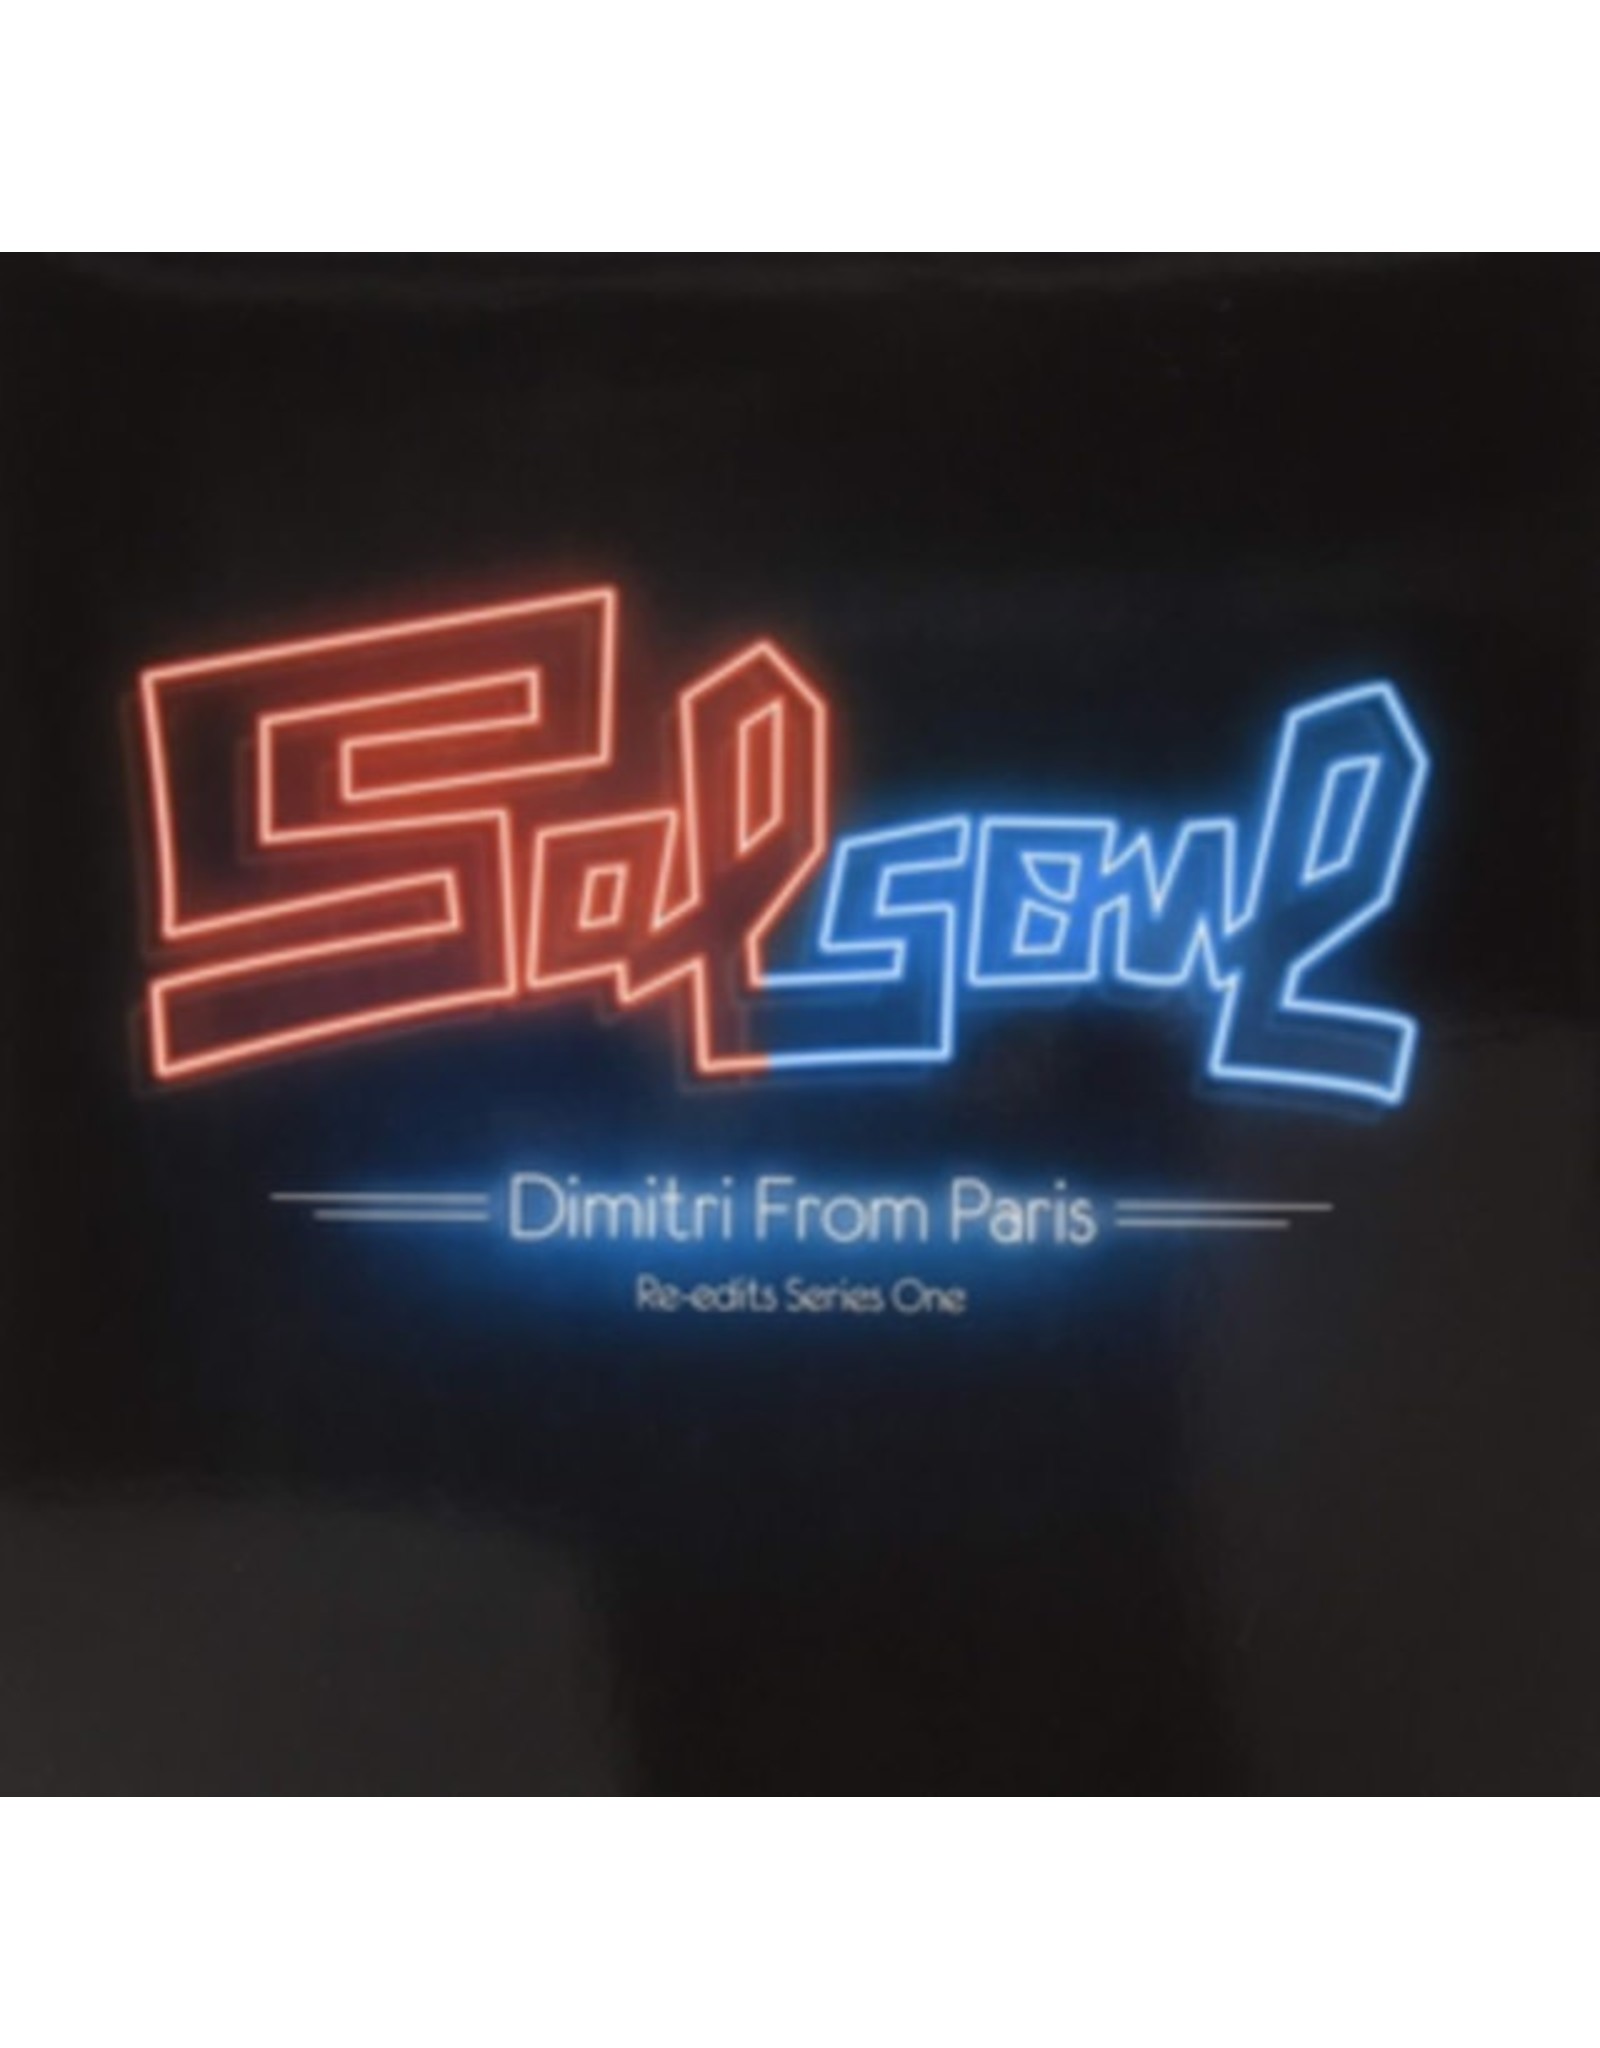 New Vinyl Dimitri From Paris - Salsoul Re-Edits Series One (Colored) 2LP